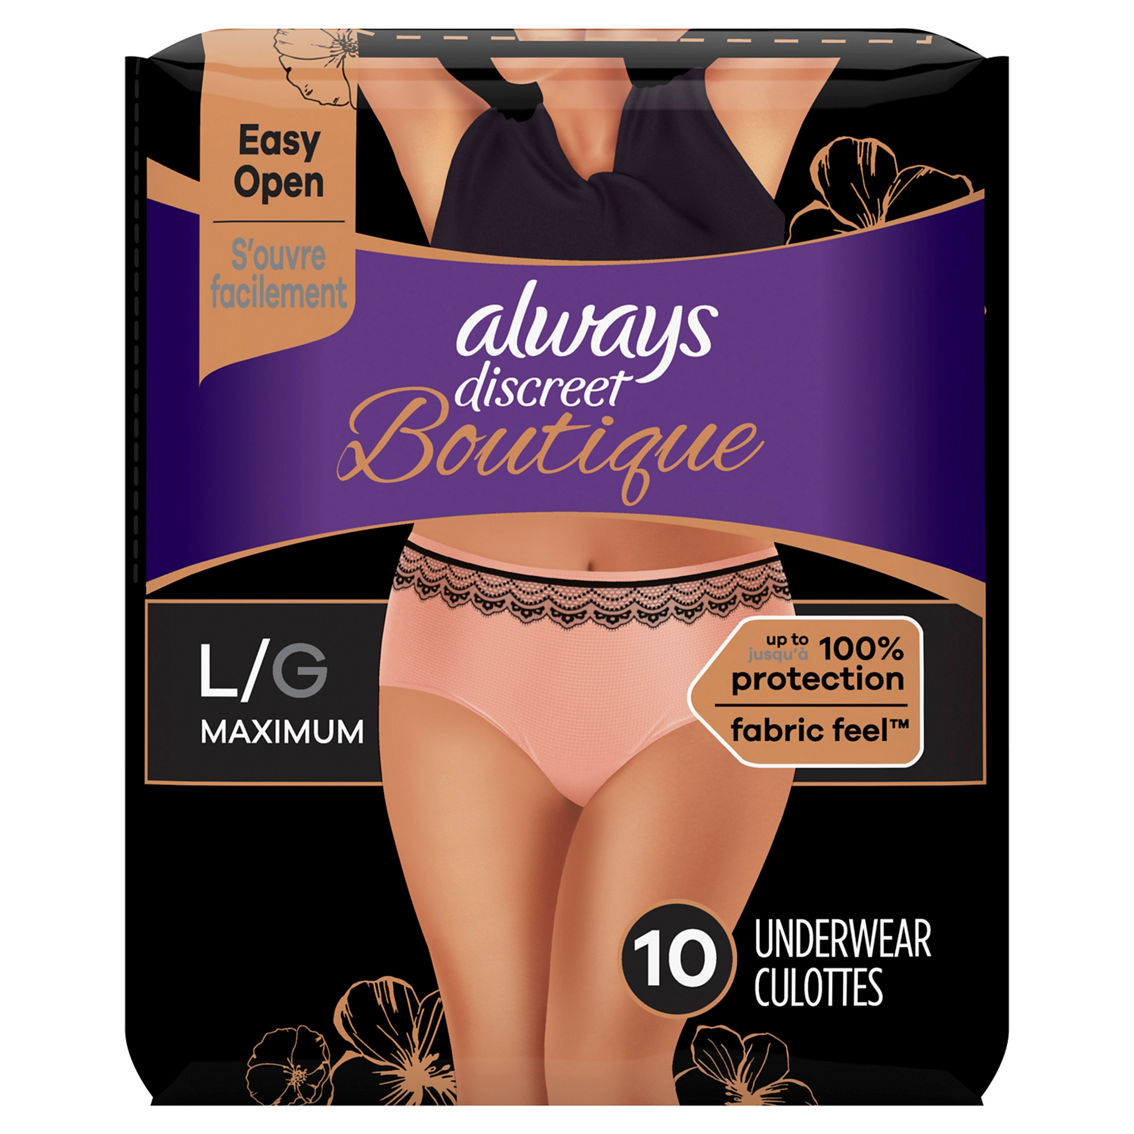 ALWAYS DISCREET Boutique Low Rise Underwear L/G (10 Count) MAX